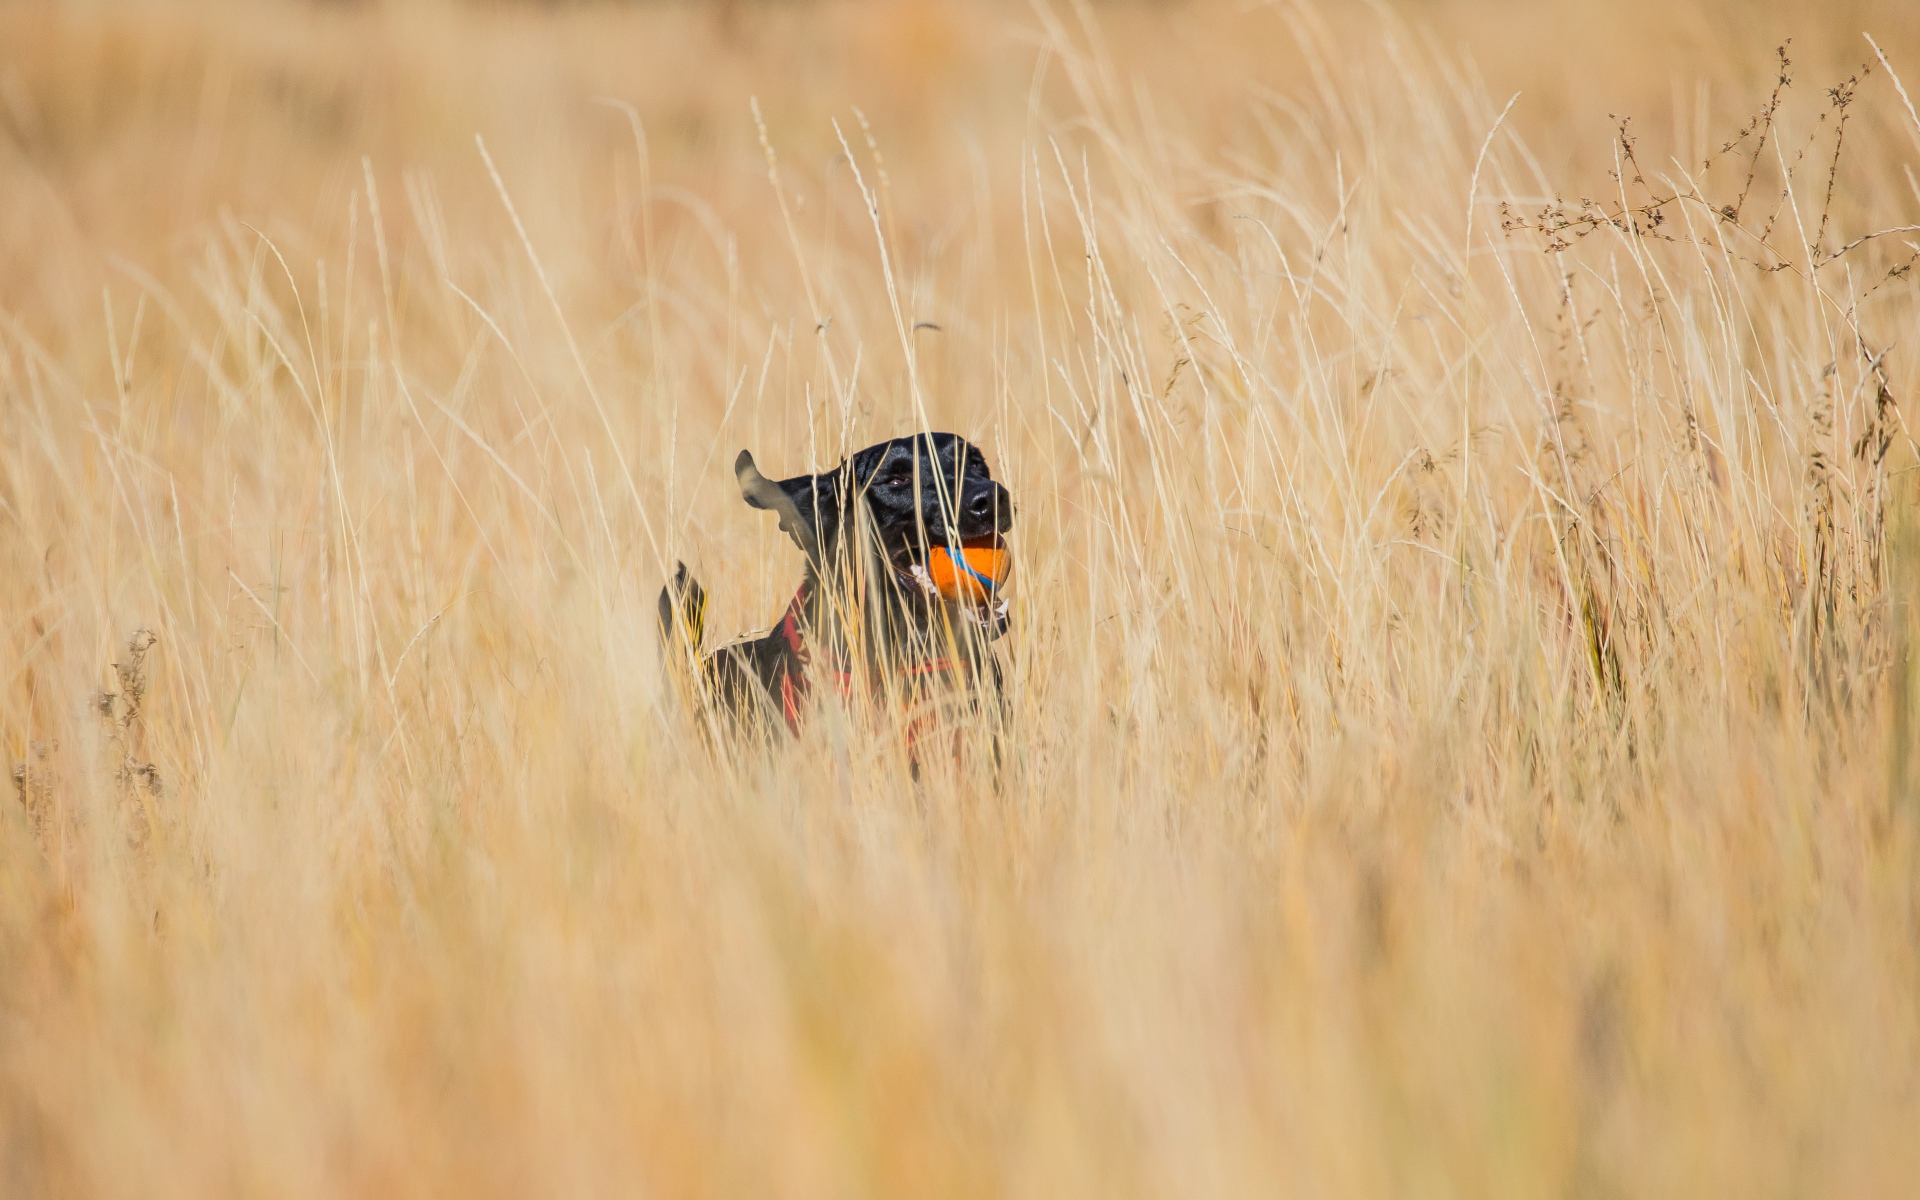 A satisfied black labrador with a toy in his teeth runs along the grass